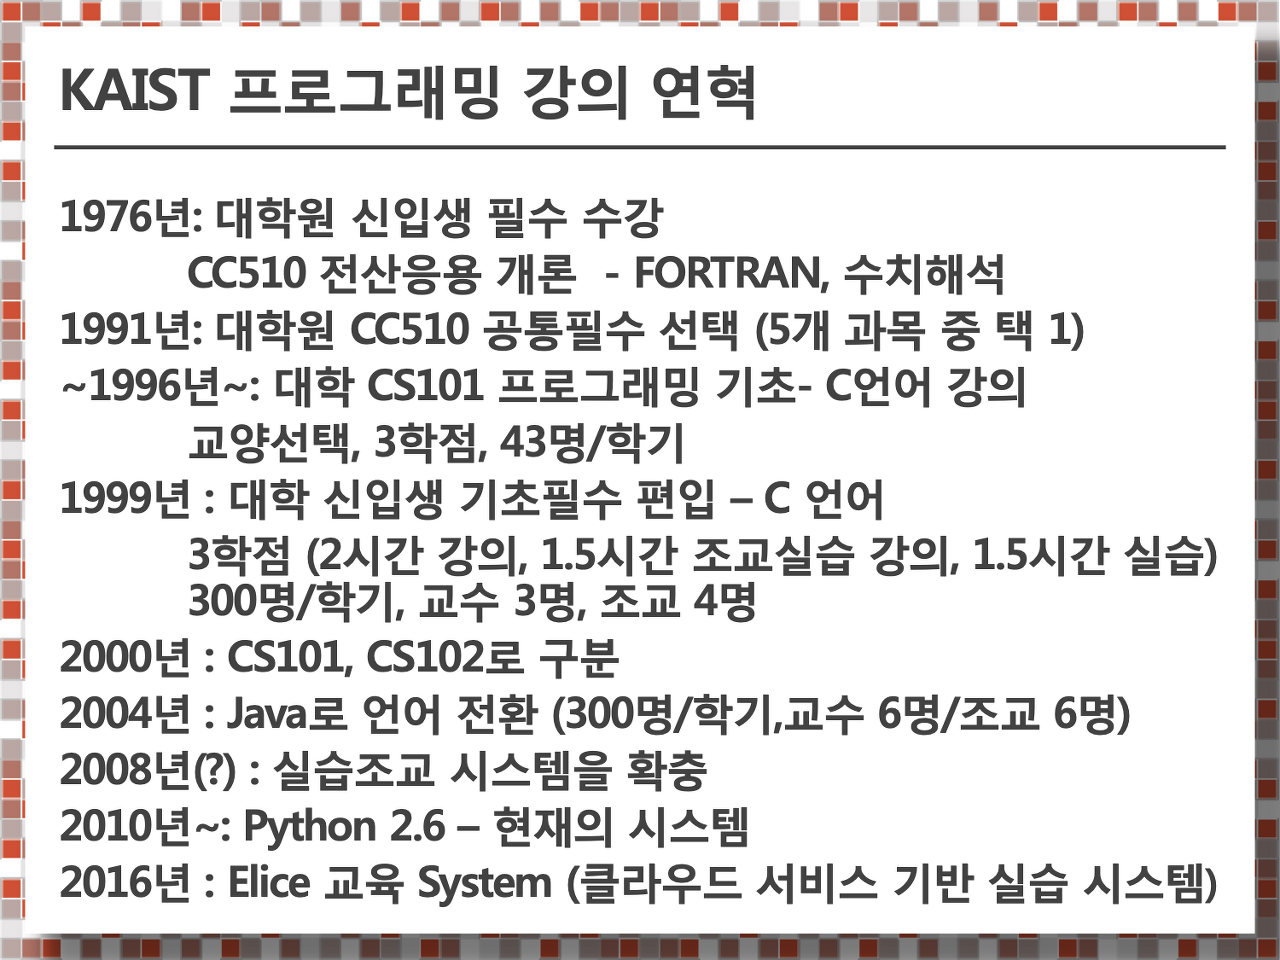 KAIST Programming Lecture History and Contents Using Elice Platform